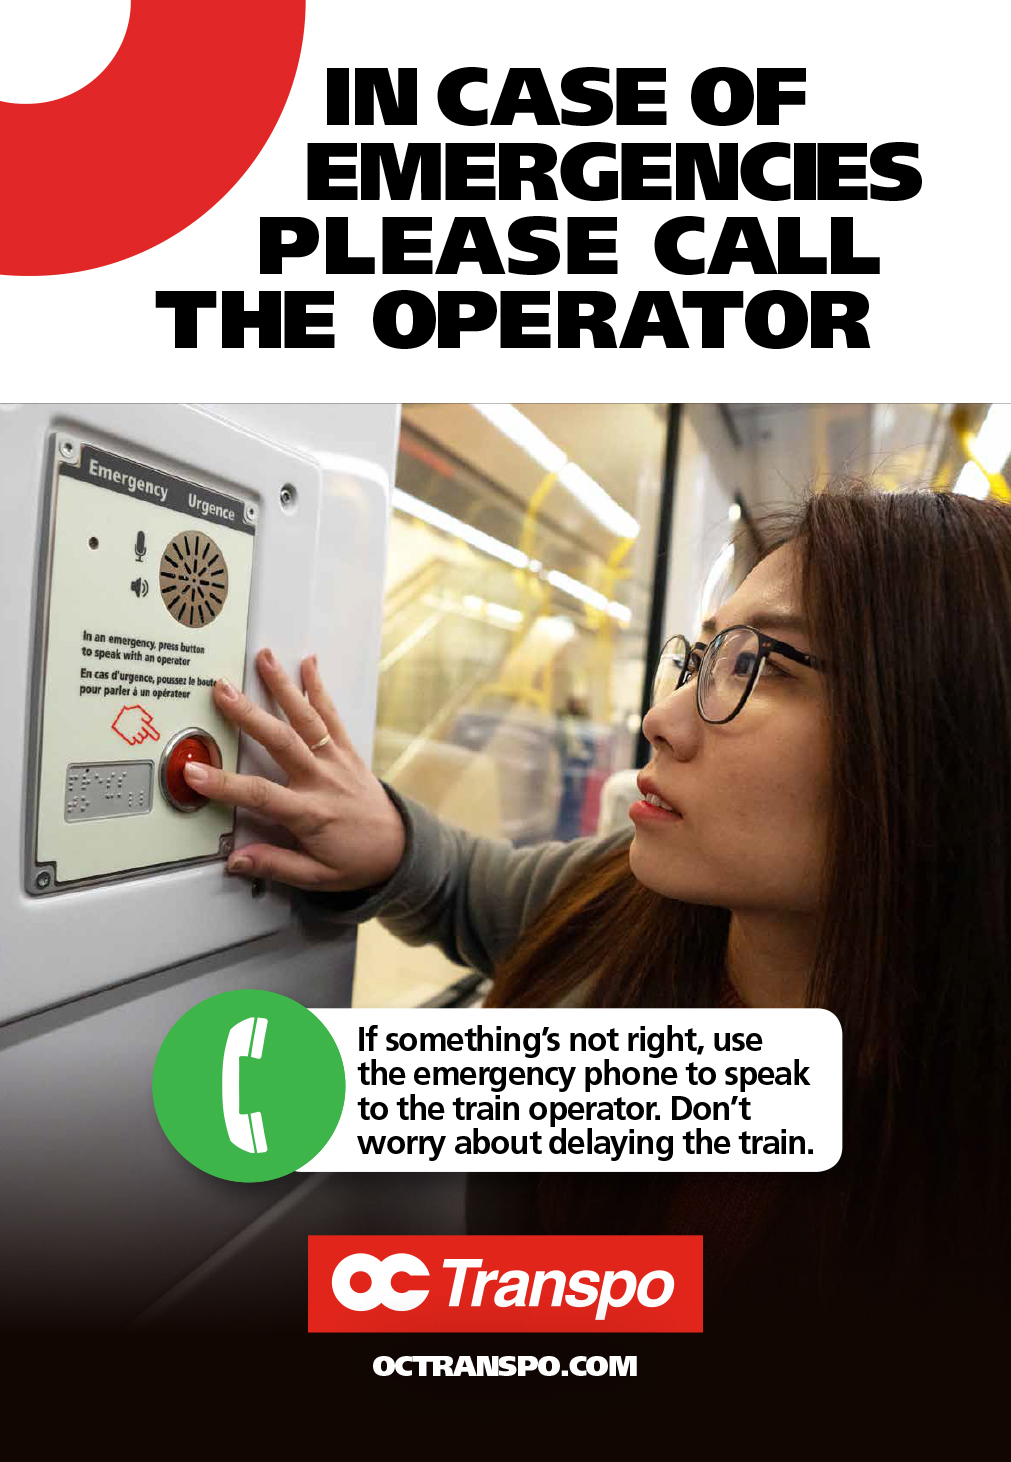 Woman using the train's emergency phone with image text: If something's not right, use the emergency phone to speak to the train operator. Don't worry about delaying the train